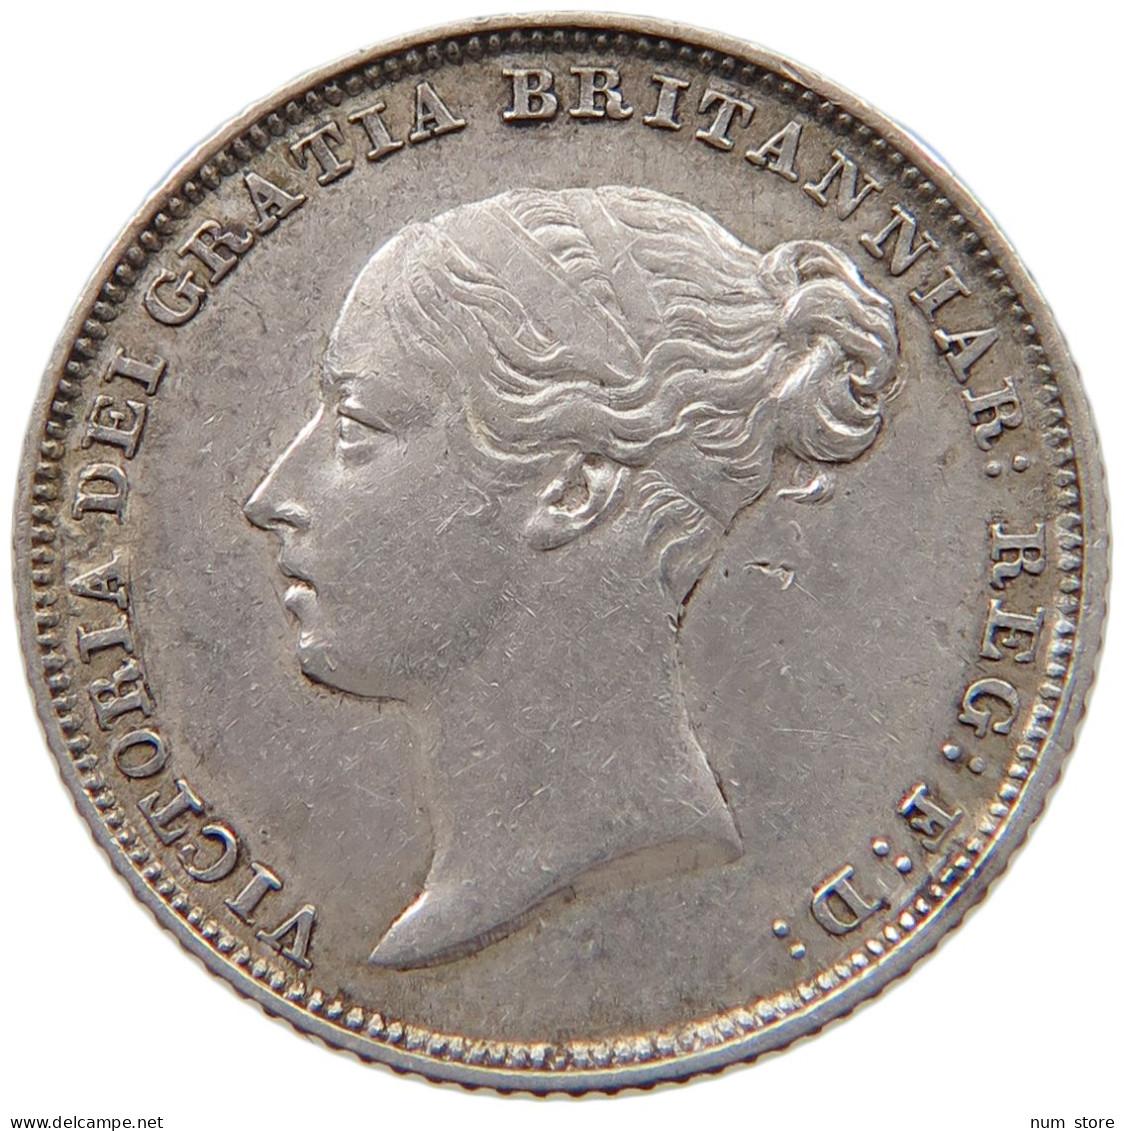 GREAT BRITAIN 6 PENCE 1843 VICTORIA 1837 - 1901 #MA 004752 - H. 6 Pence